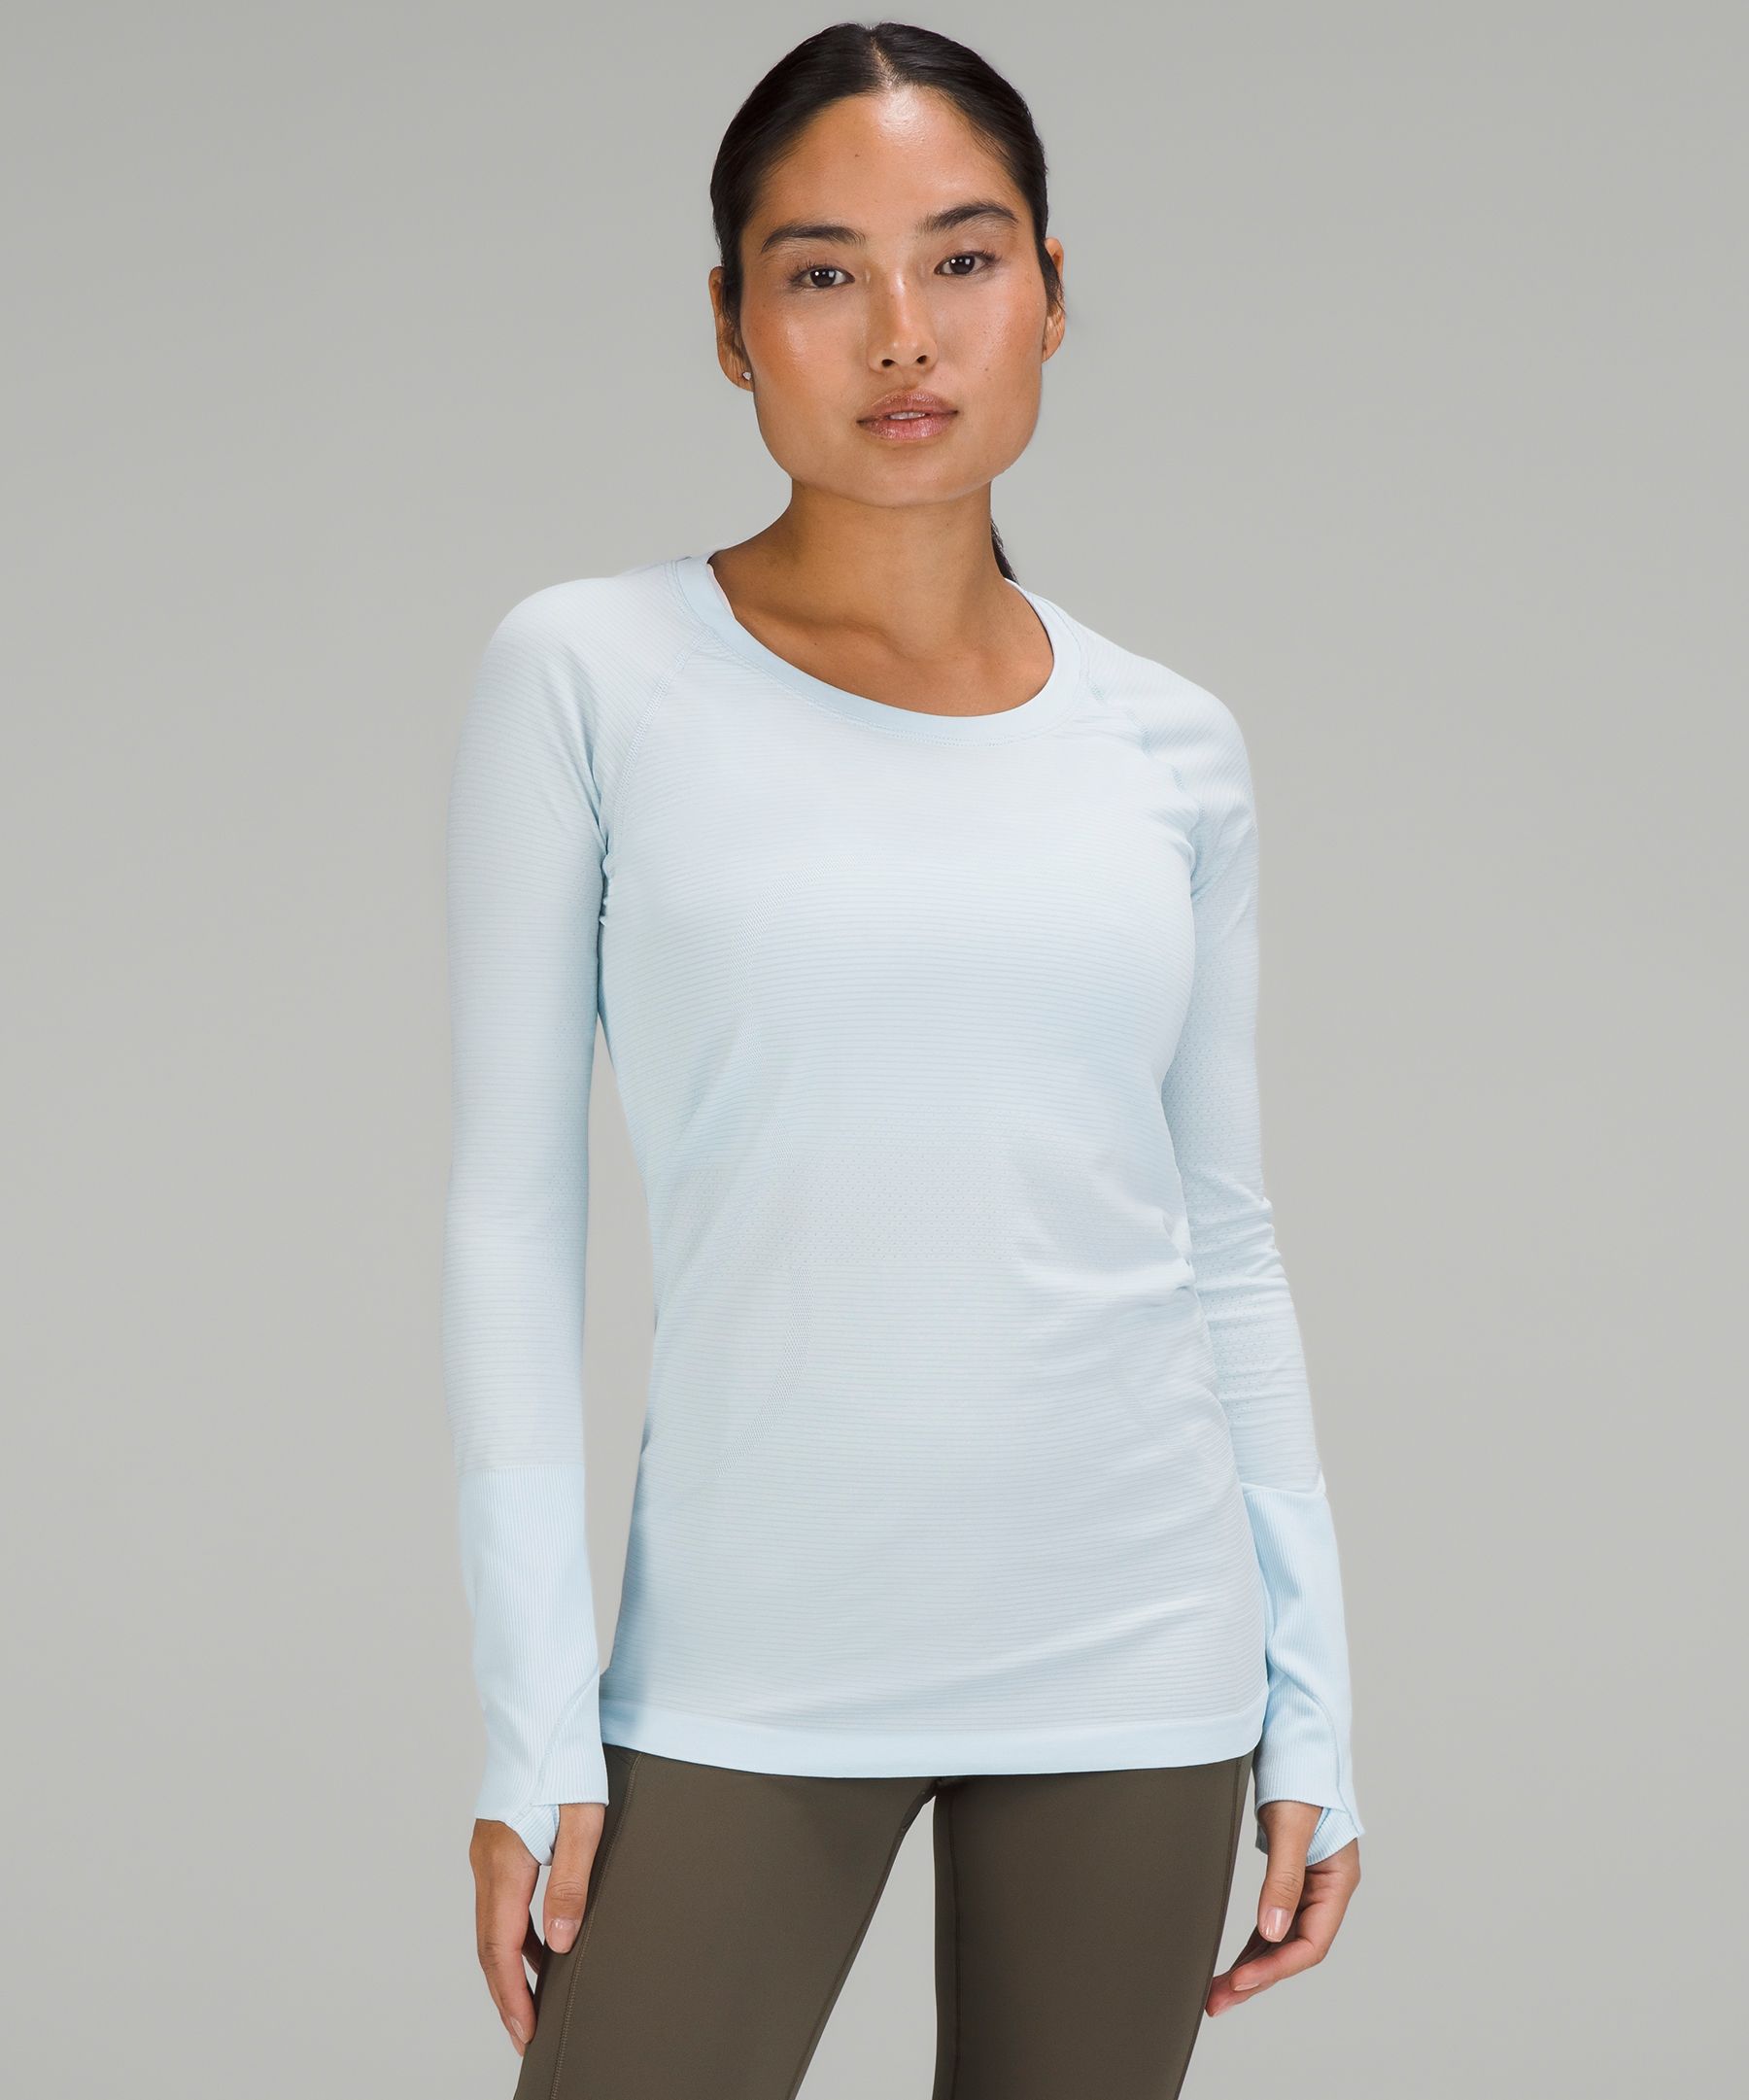 Stay stylish and comfortable with the Lululemon Swiftly Tech Long Sleeve 2.0